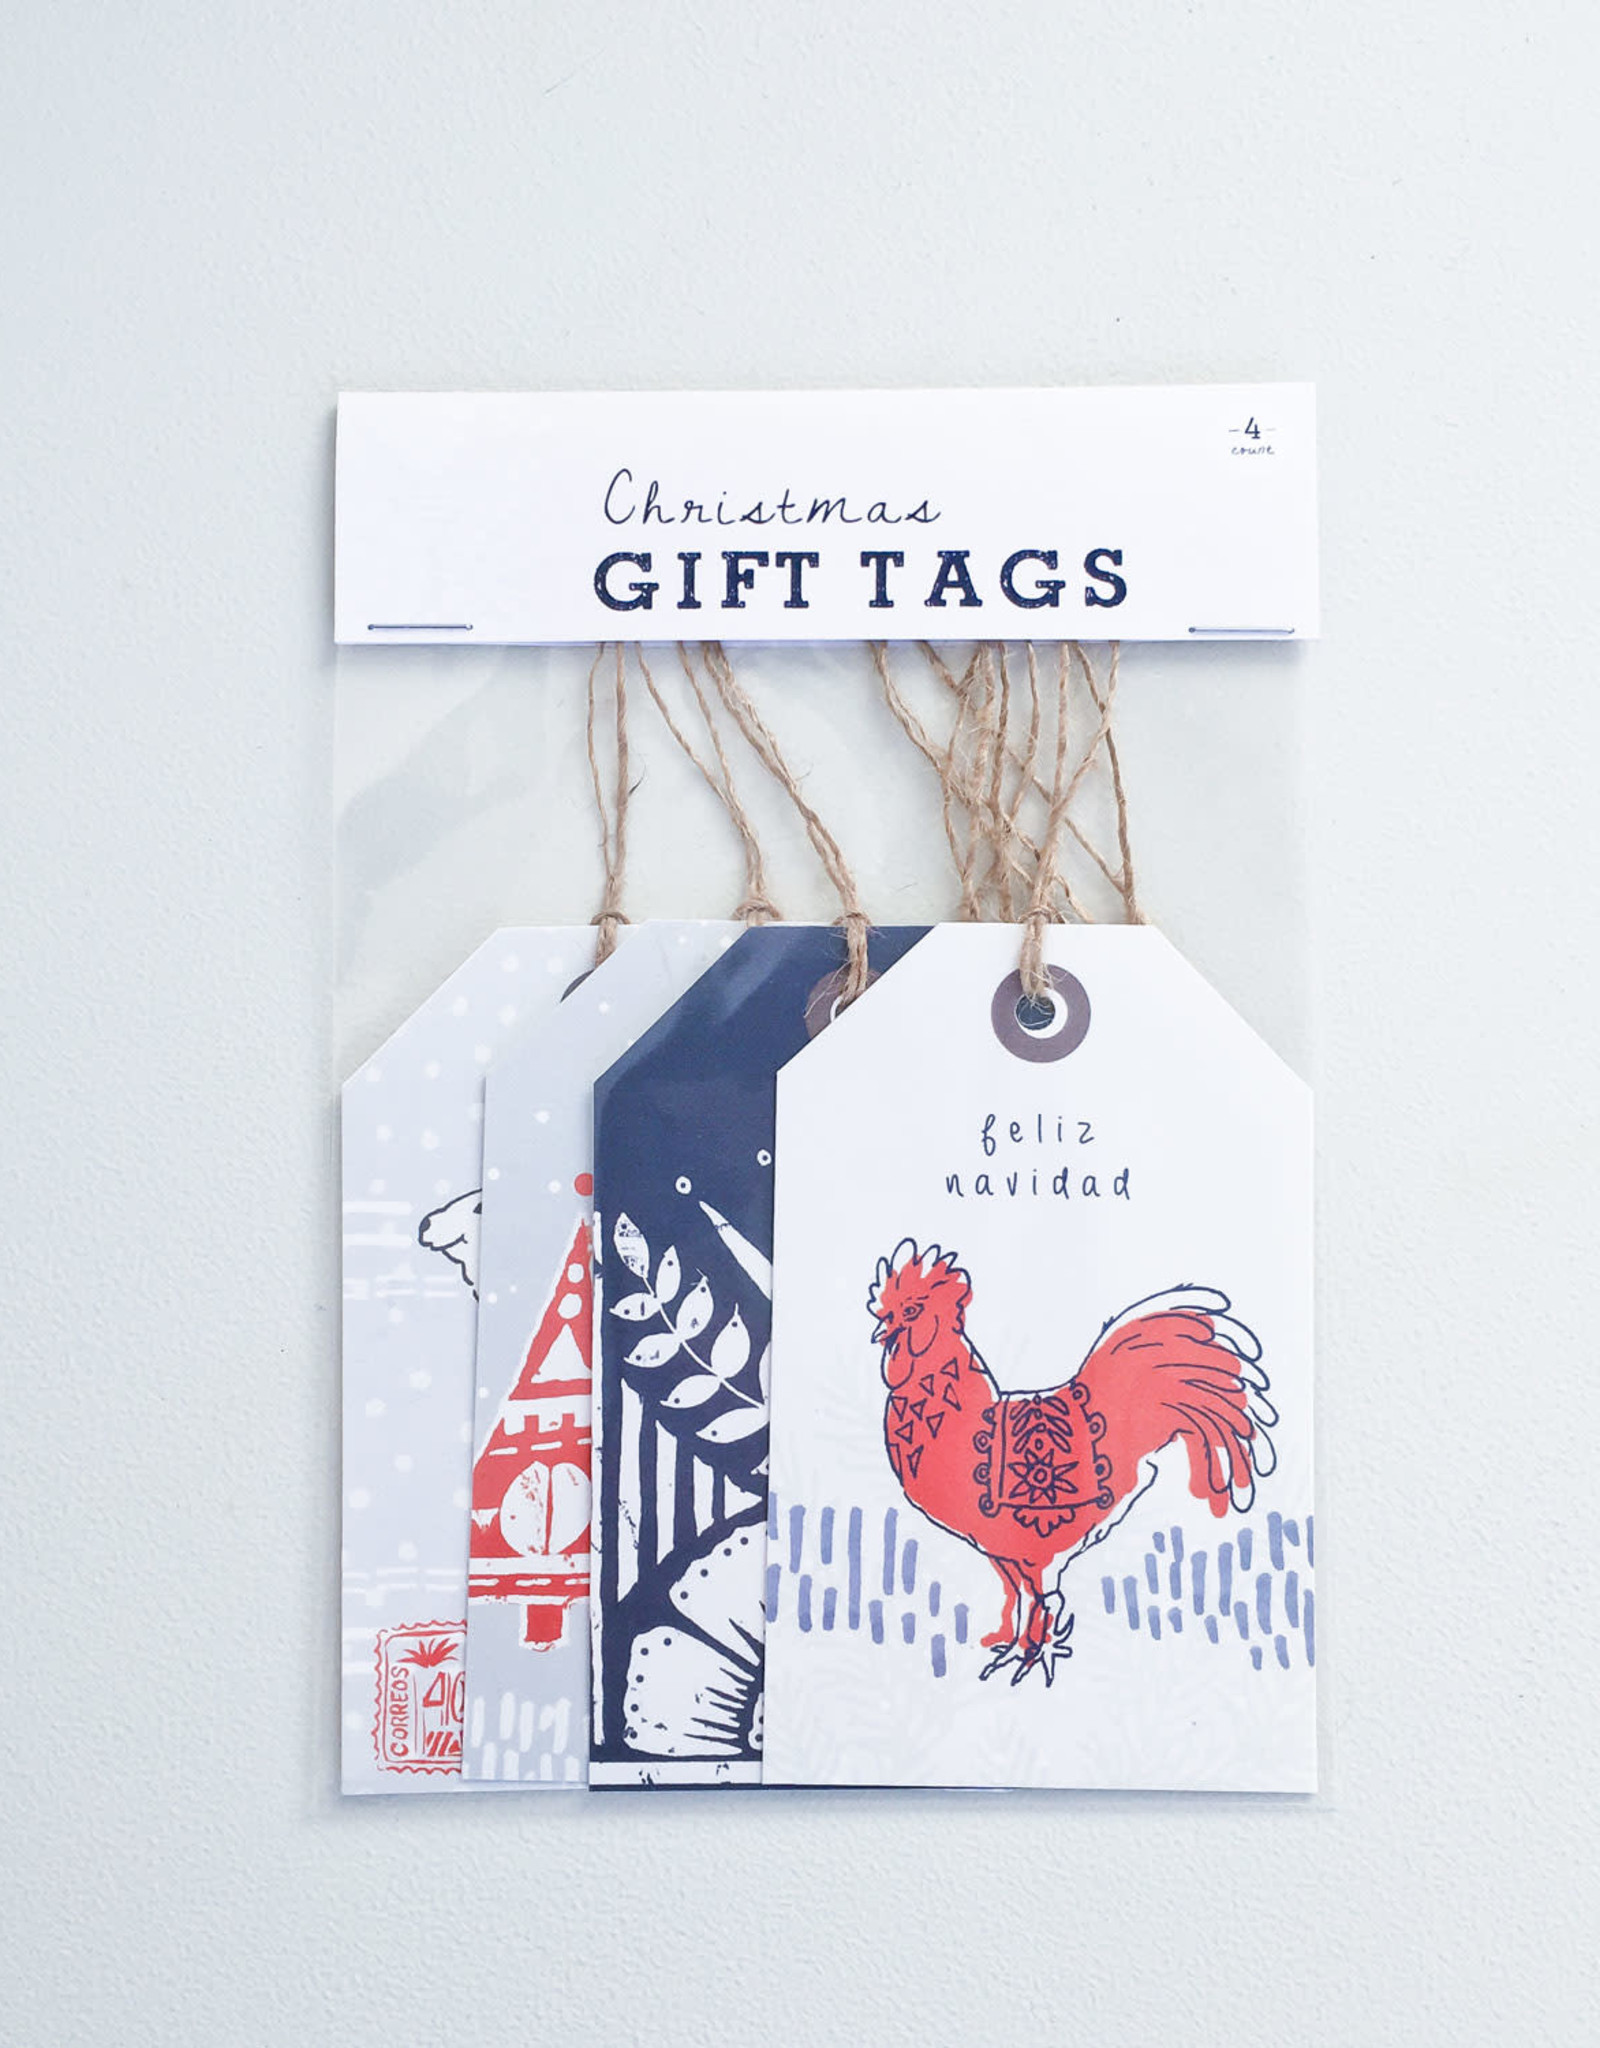 Highberry Dew Highberry Dew - Large Gift tags Llama and Rooster